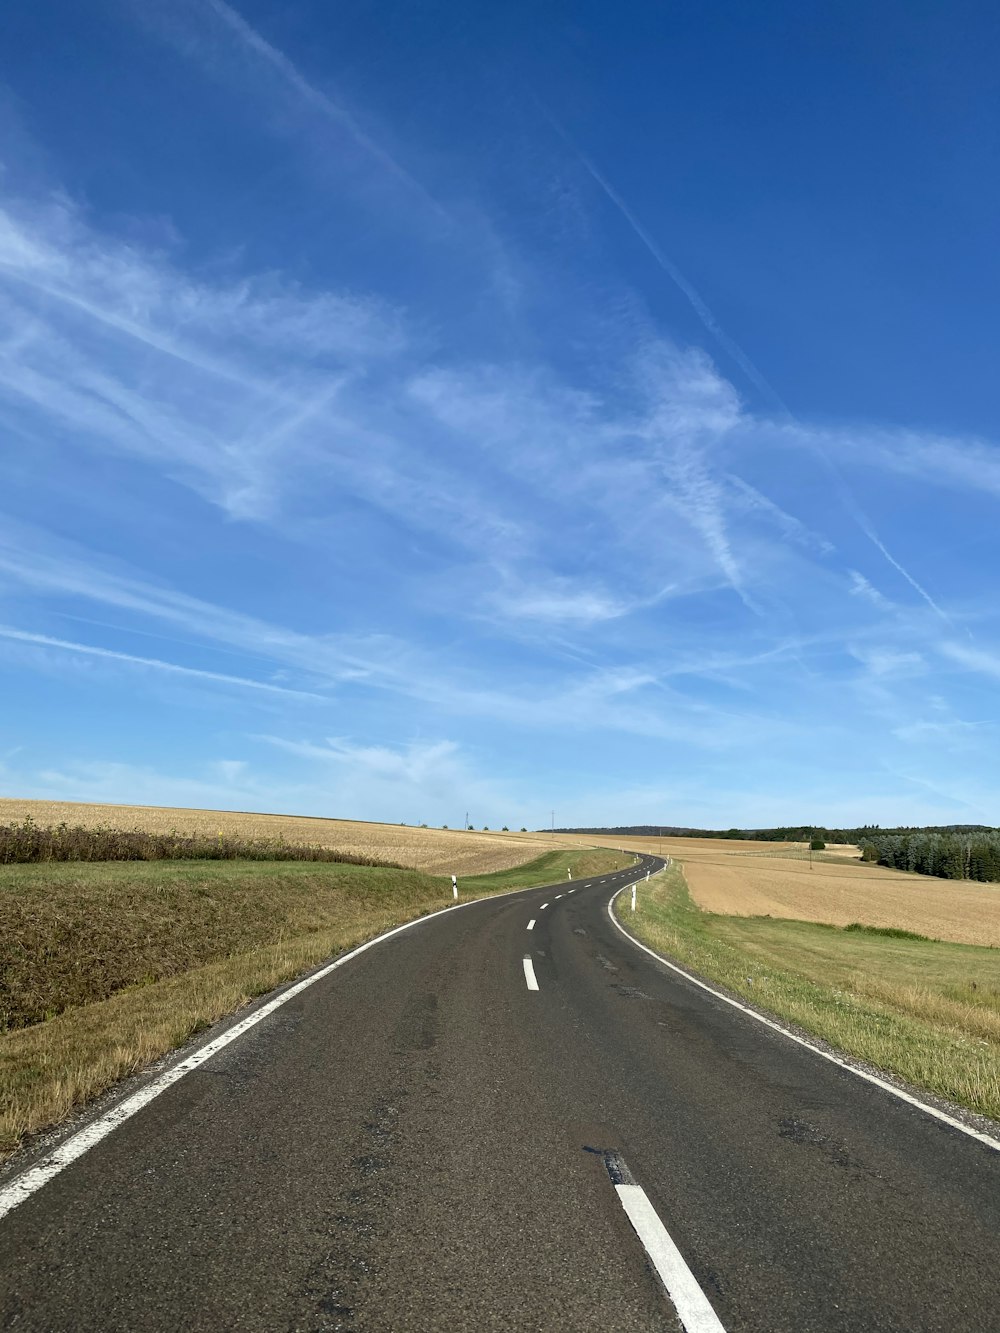 gray asphalt road between green grass field under blue and white sunny cloudy sky during daytime